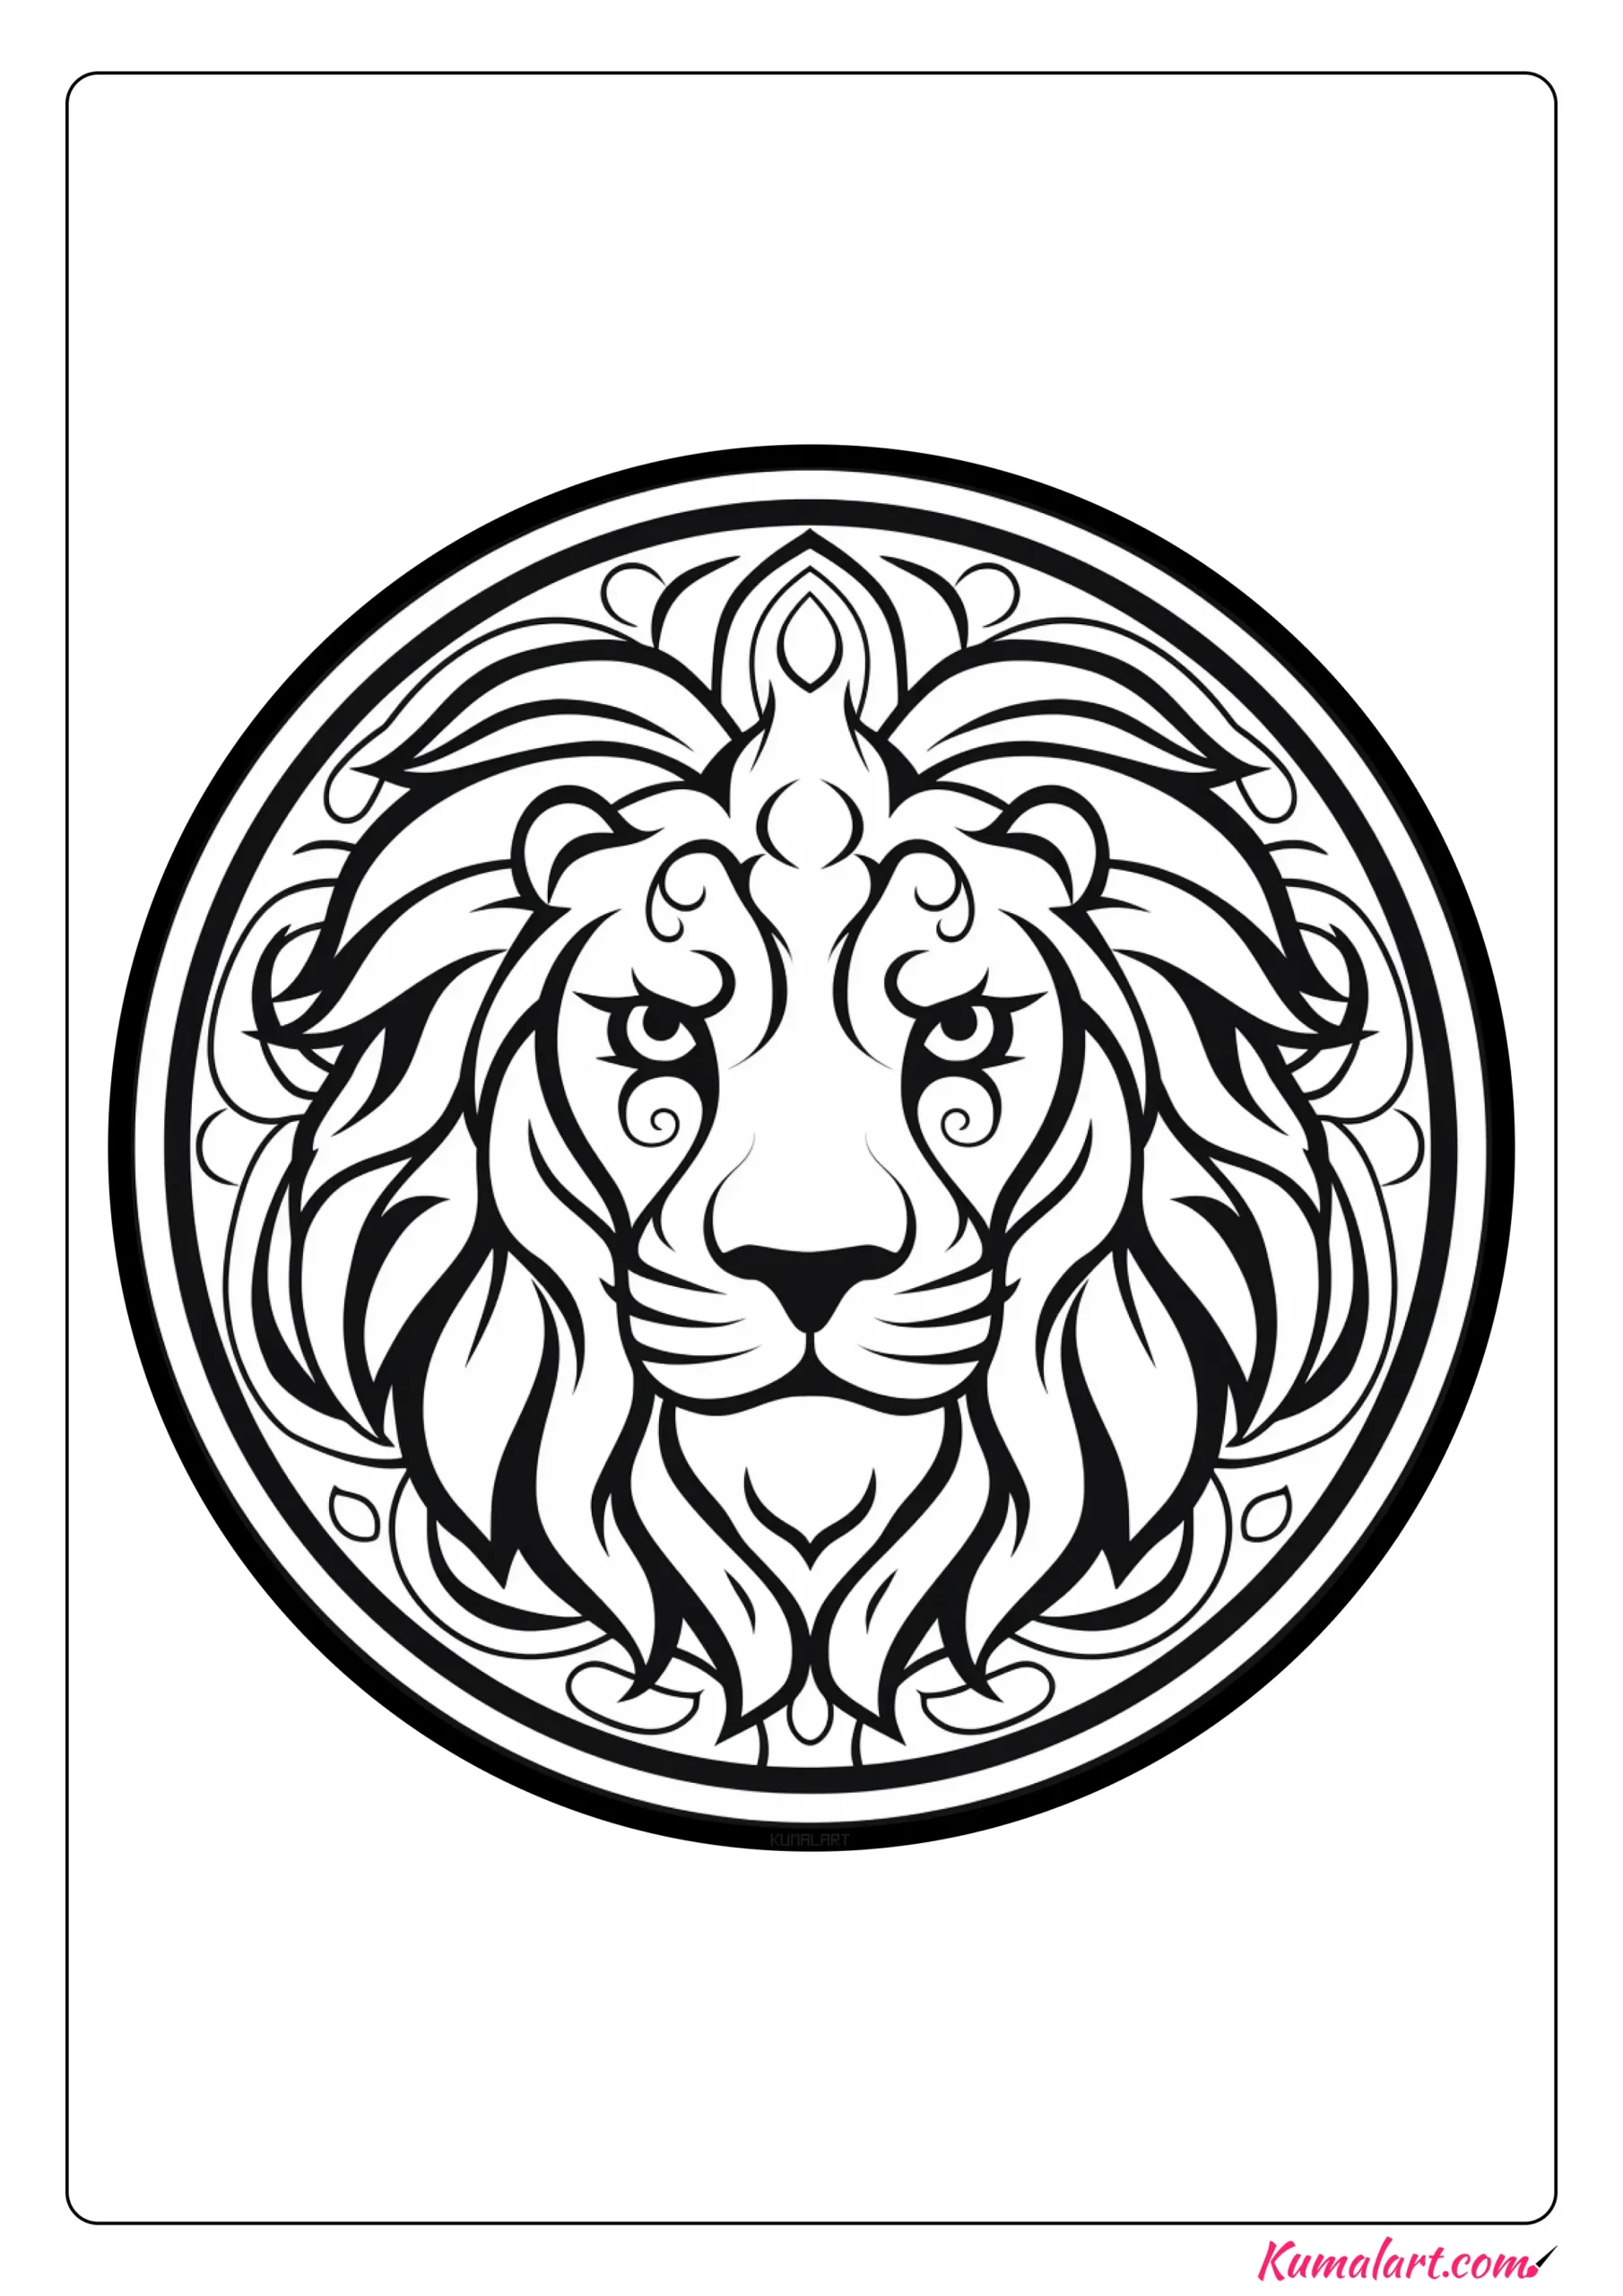 Rocky the Lion Coloring Page